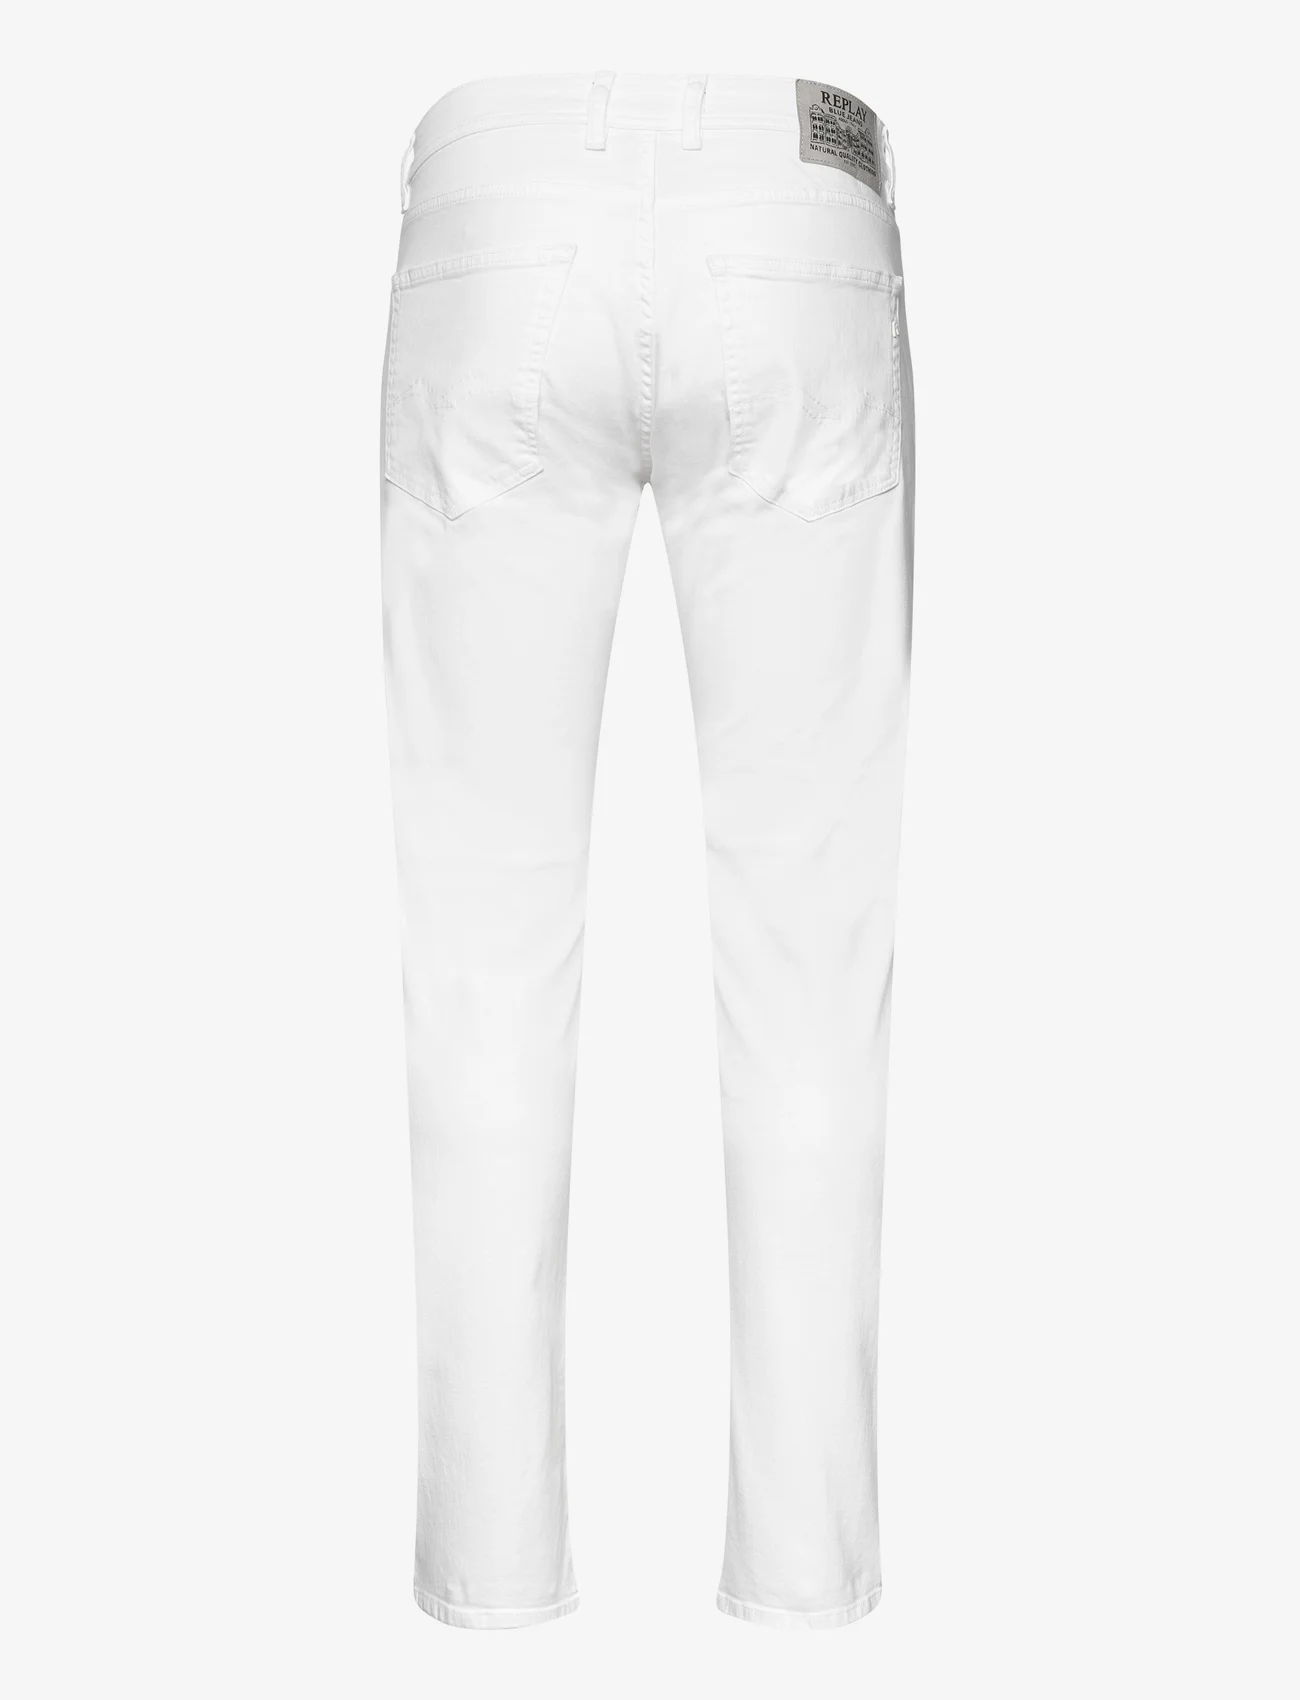 Replay - GROVER Trousers STRAIGHT - skinny jeans - white - 1